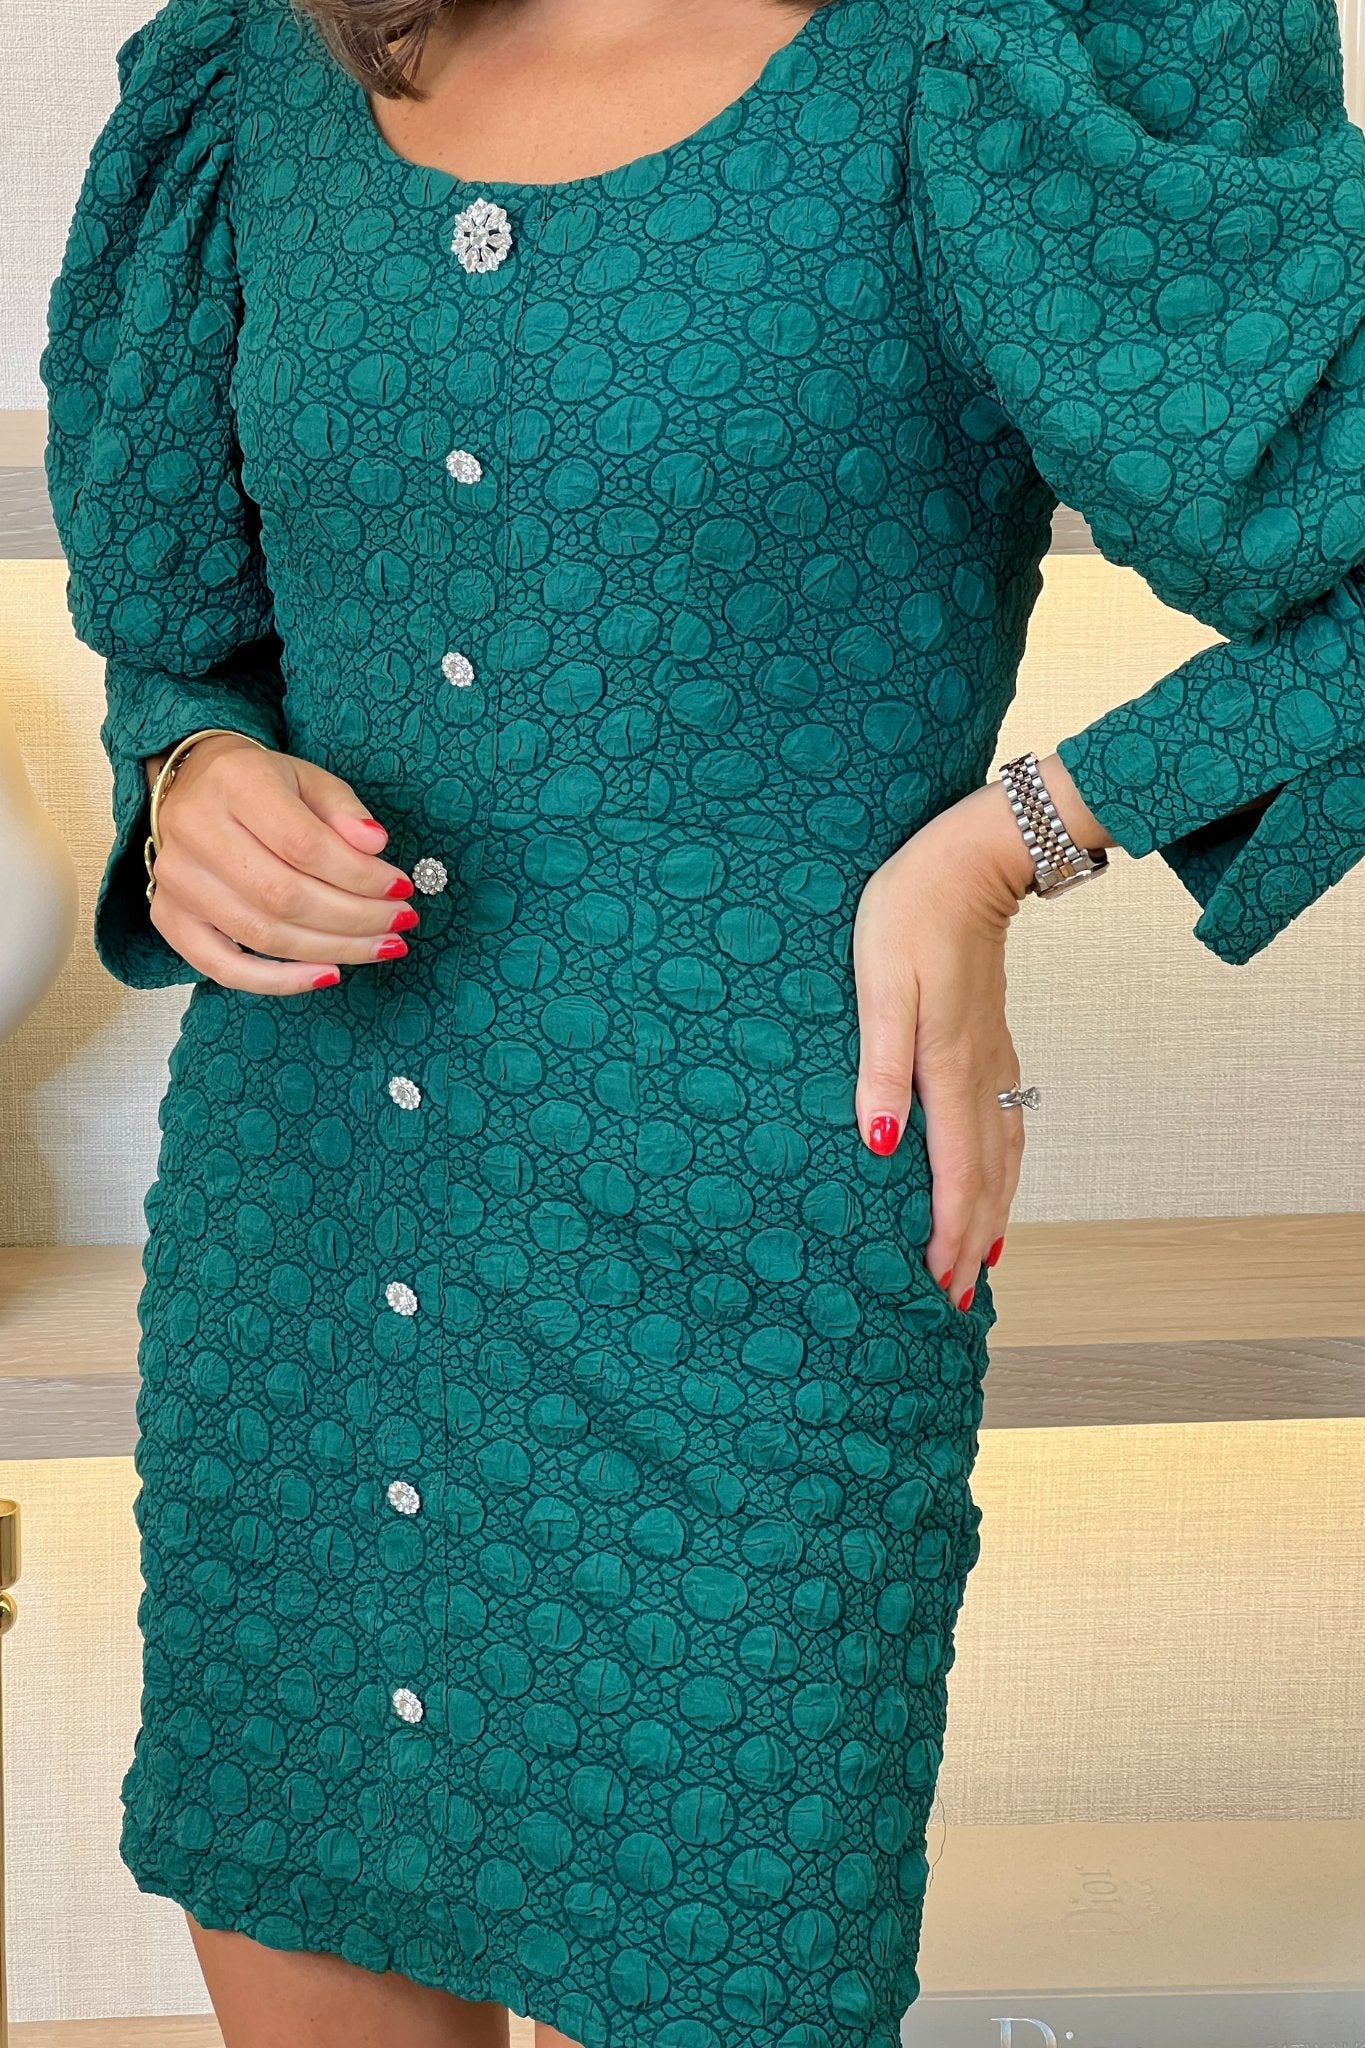 Paige Textured Puff Sleeve Dress In Green - The Walk in Wardrobe